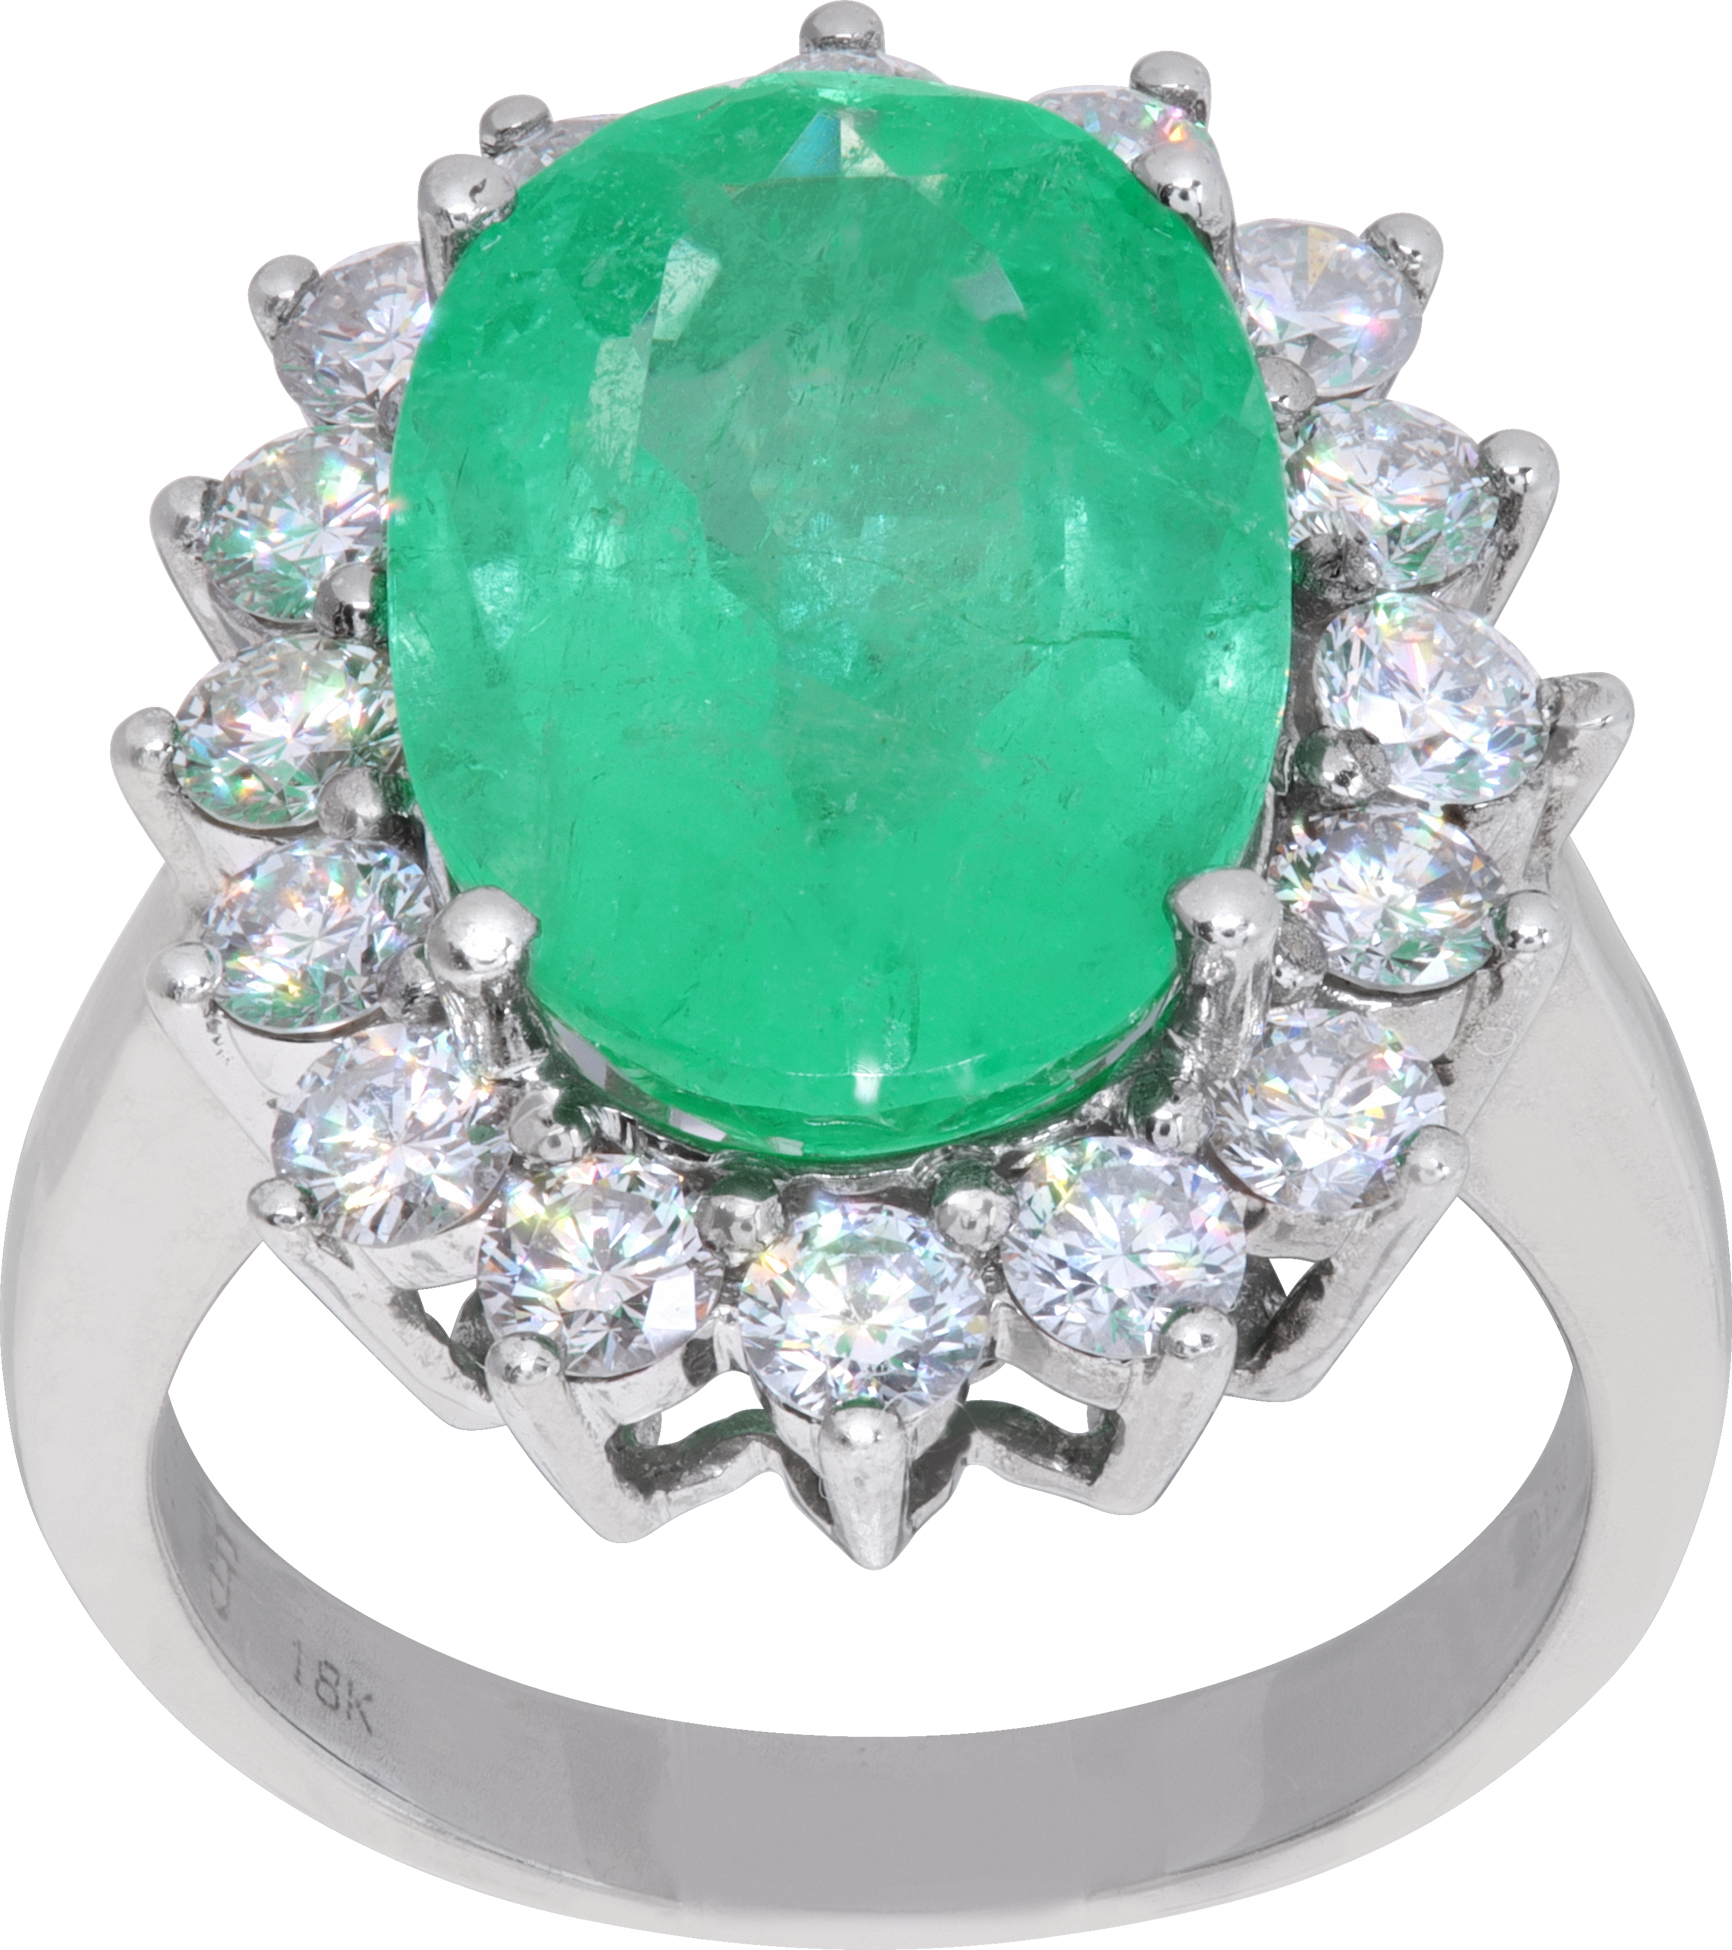 Emerald and diamond ring in 18k white gold